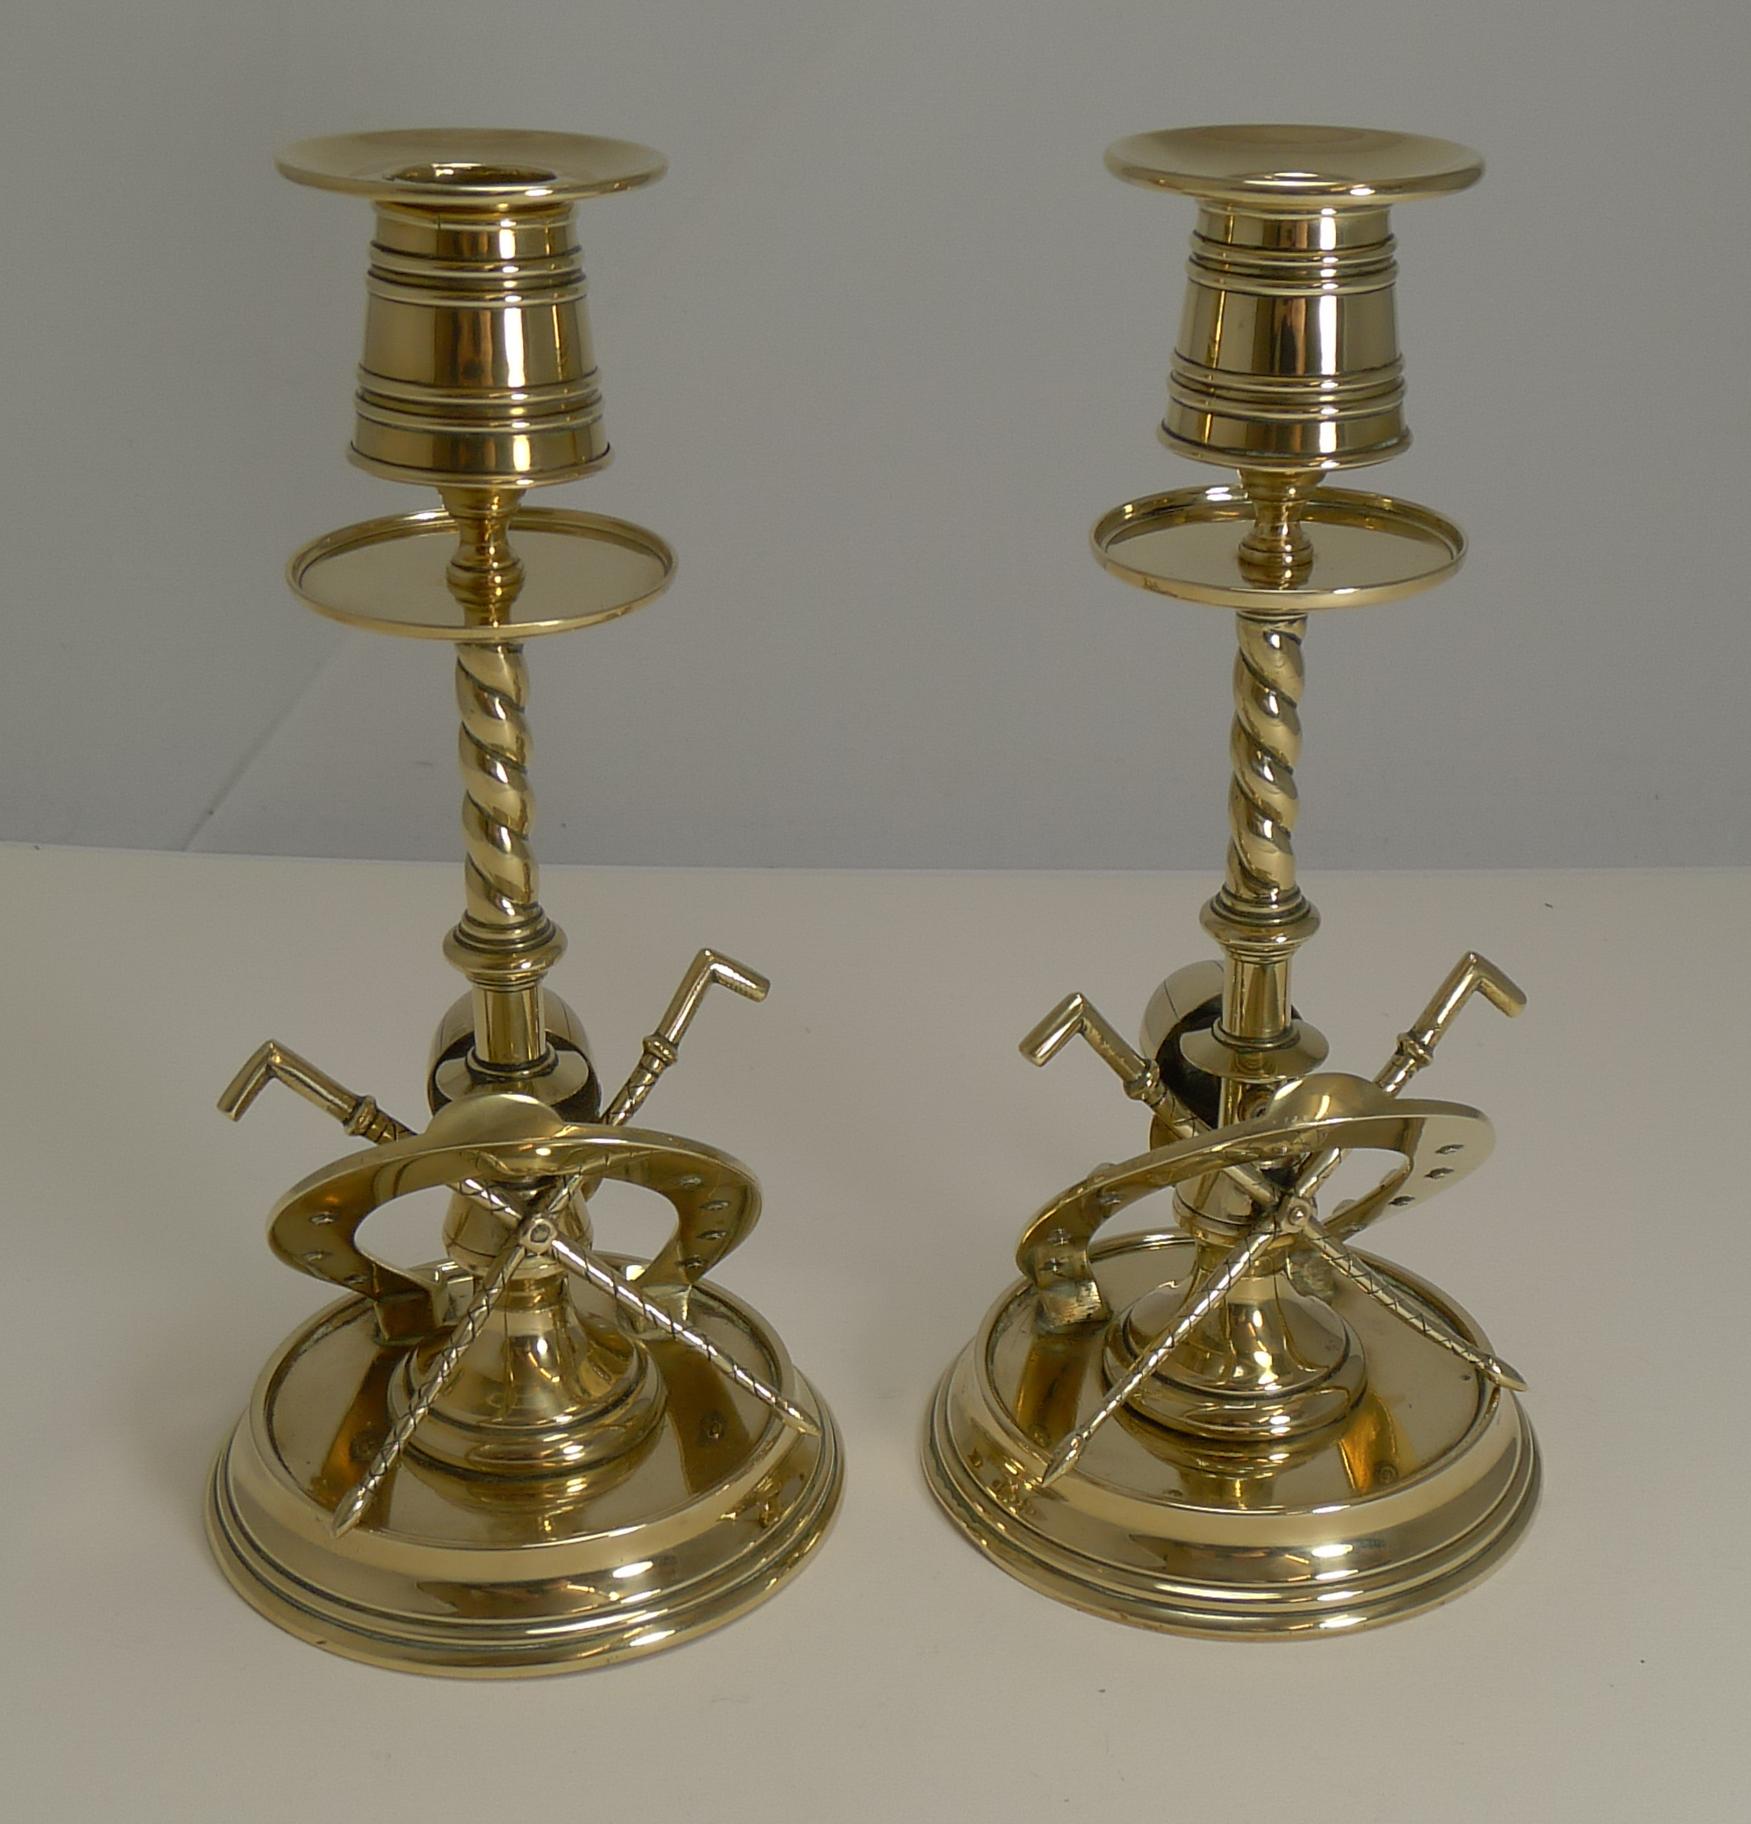 Late 19th Century Handsome Pair of Antique Novelty Equestrian Candlesticks, circa 1890